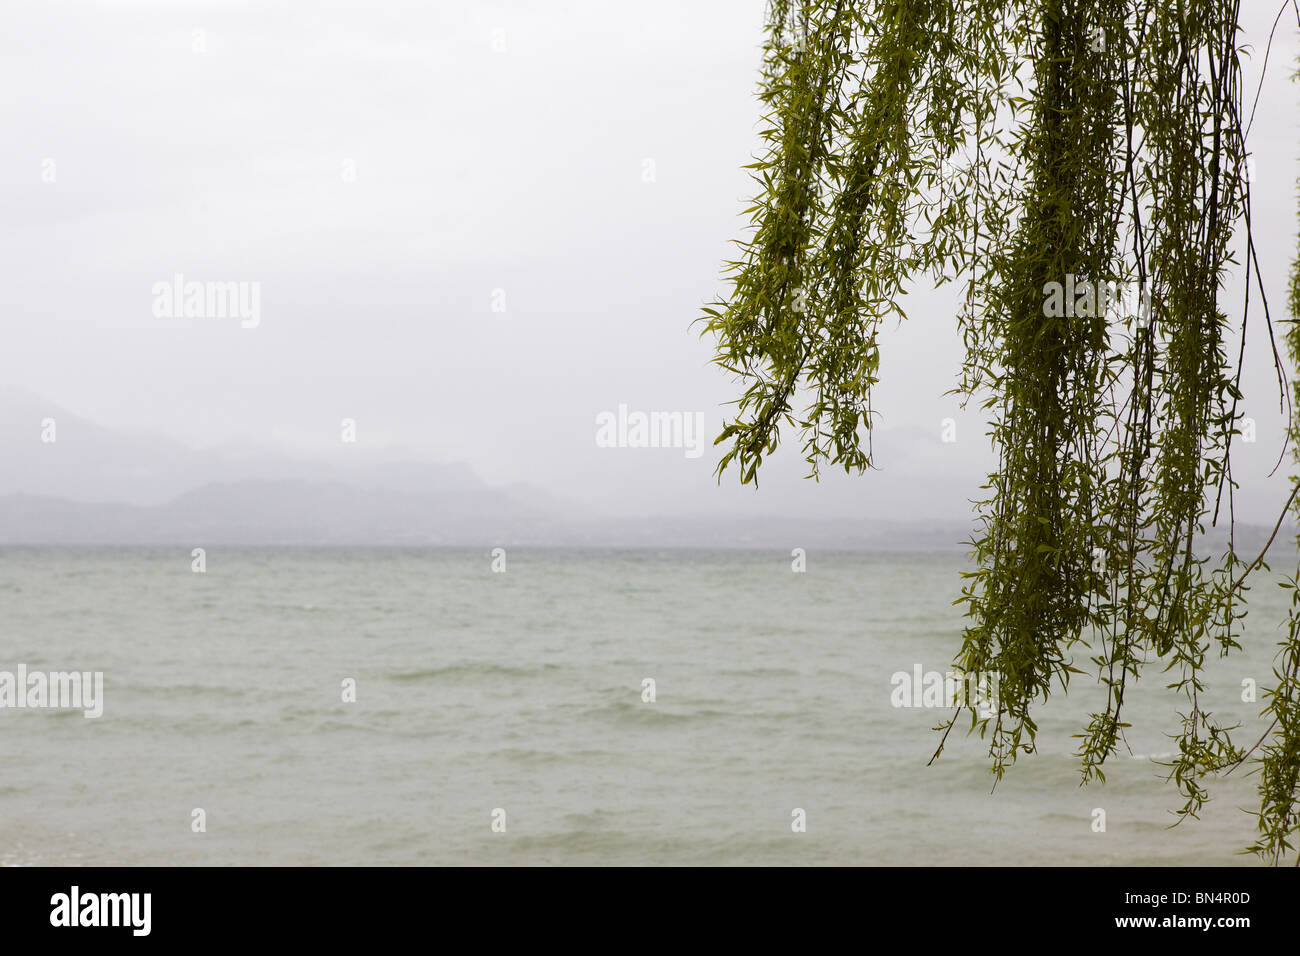 Weeping willow on the banks of Lake Garda, Italy Stock Photo